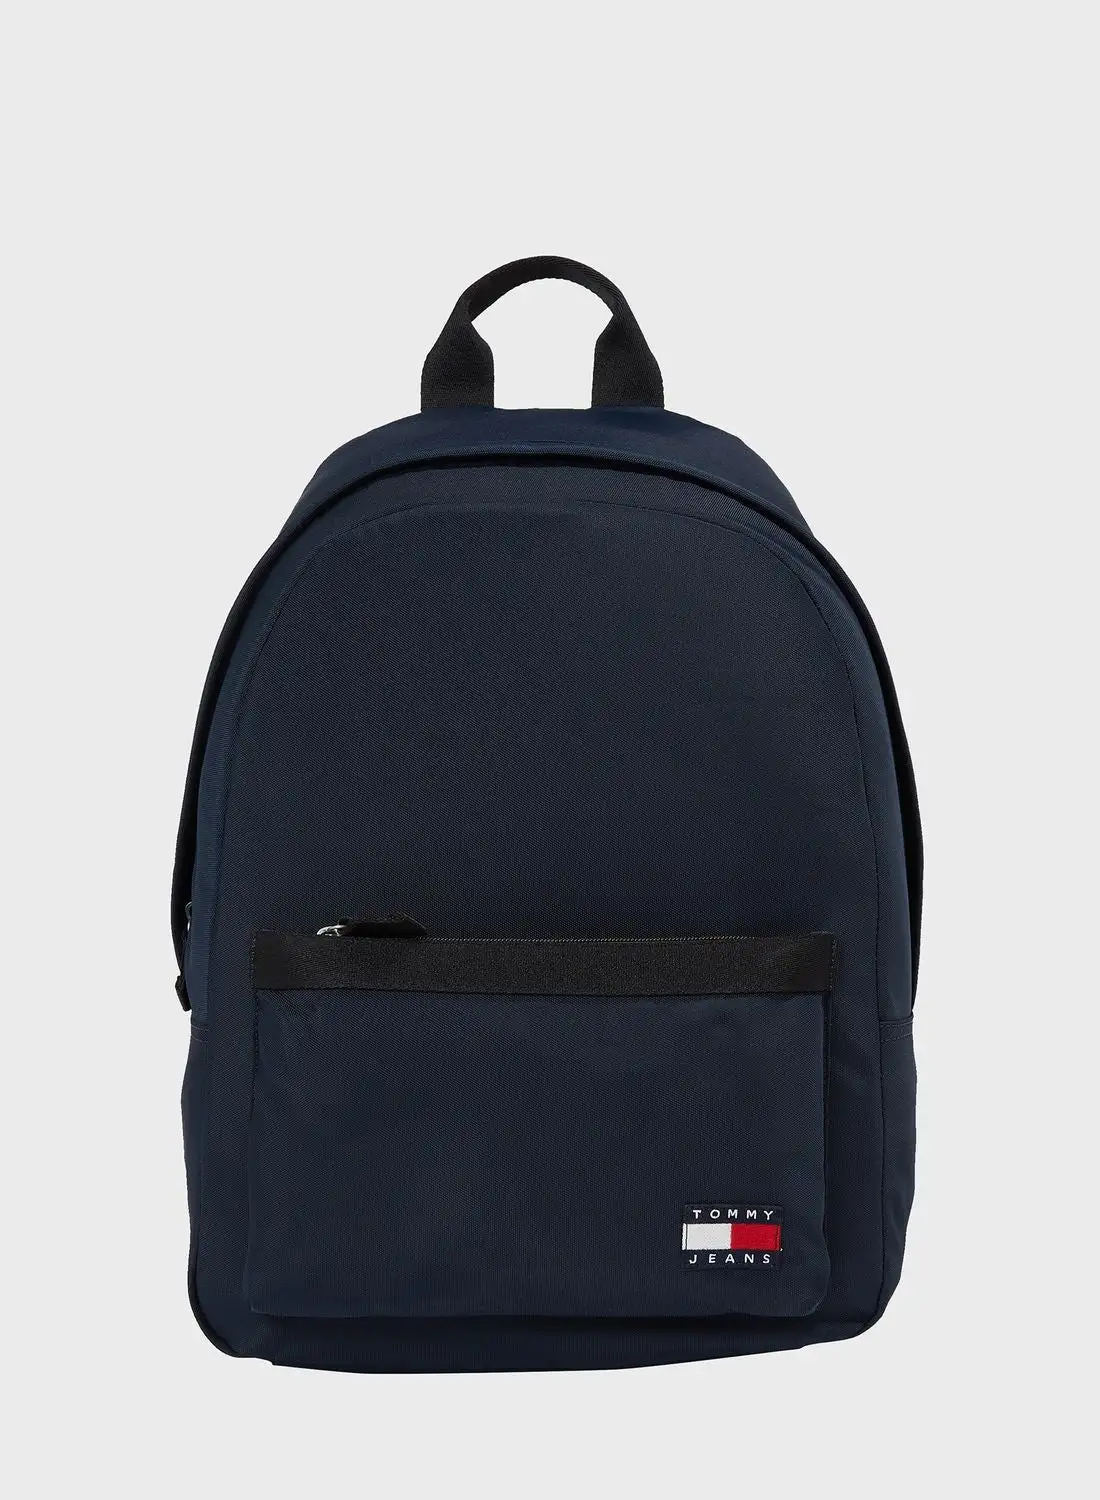 TOMMY JEANS Daily Dome Backpack